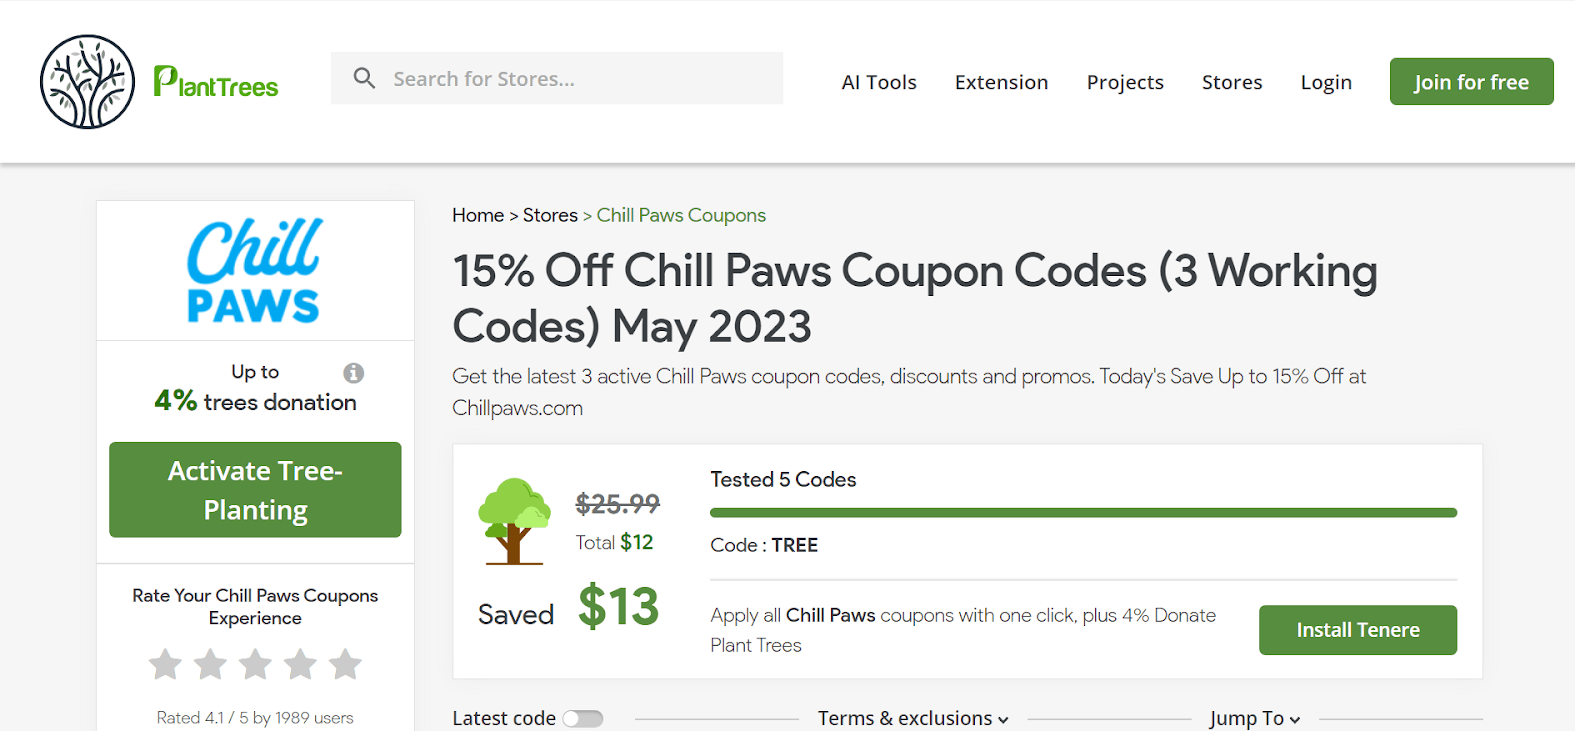 How To Use Chill Paws Discount Codes 3